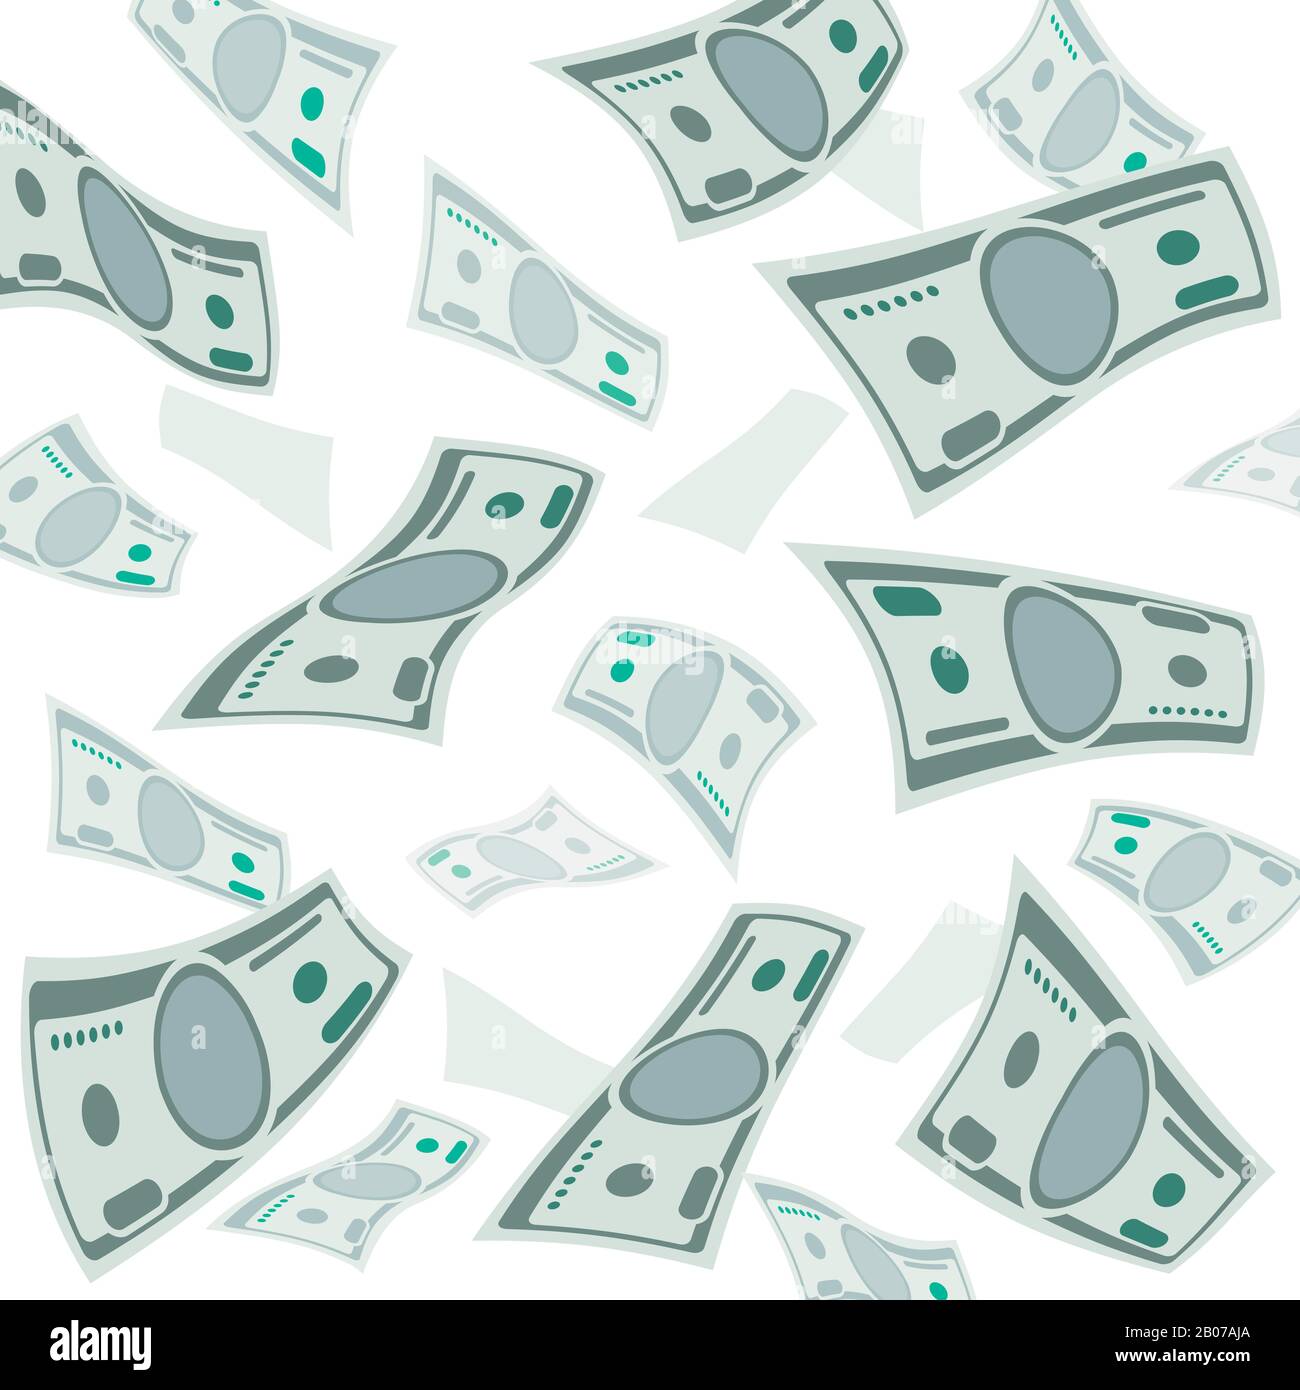 Falling money, usa currency banknotes vector background. Jackpot or profit, financial capital illustration Stock Vector